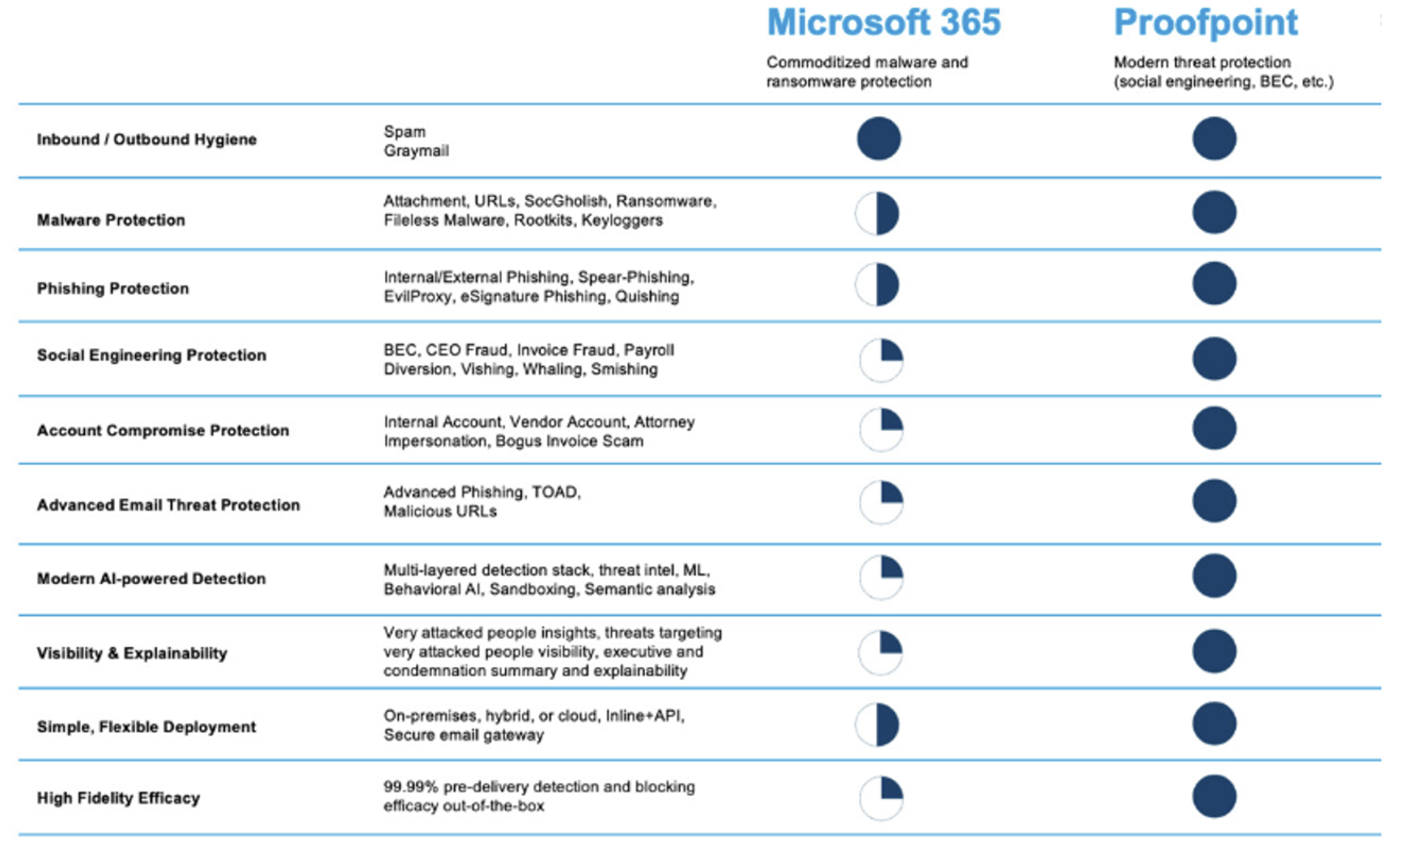 A comparison of Microsoft 365 and Proofpoint protection